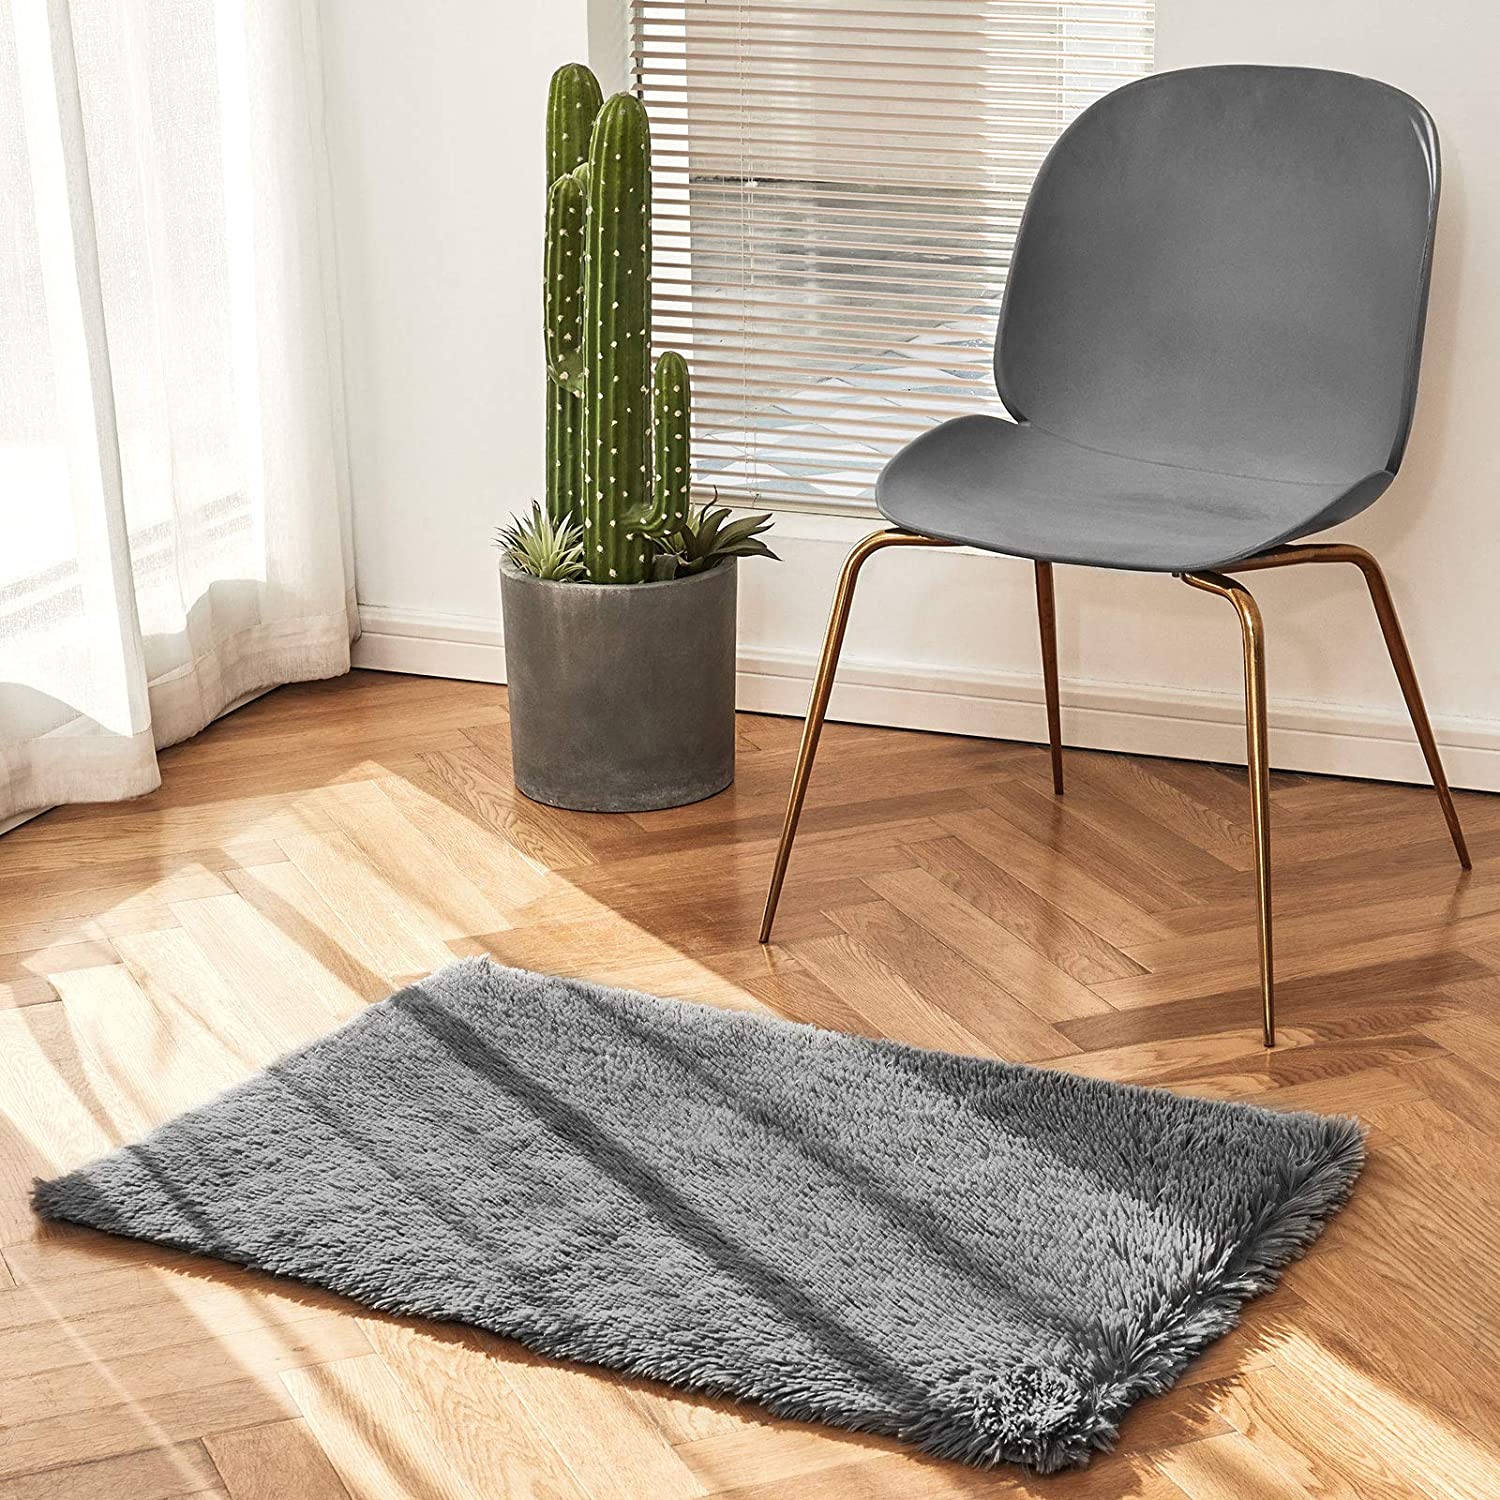 Machine Washable Area Rug for Bedroom, Dorm Room, Small Fluffy